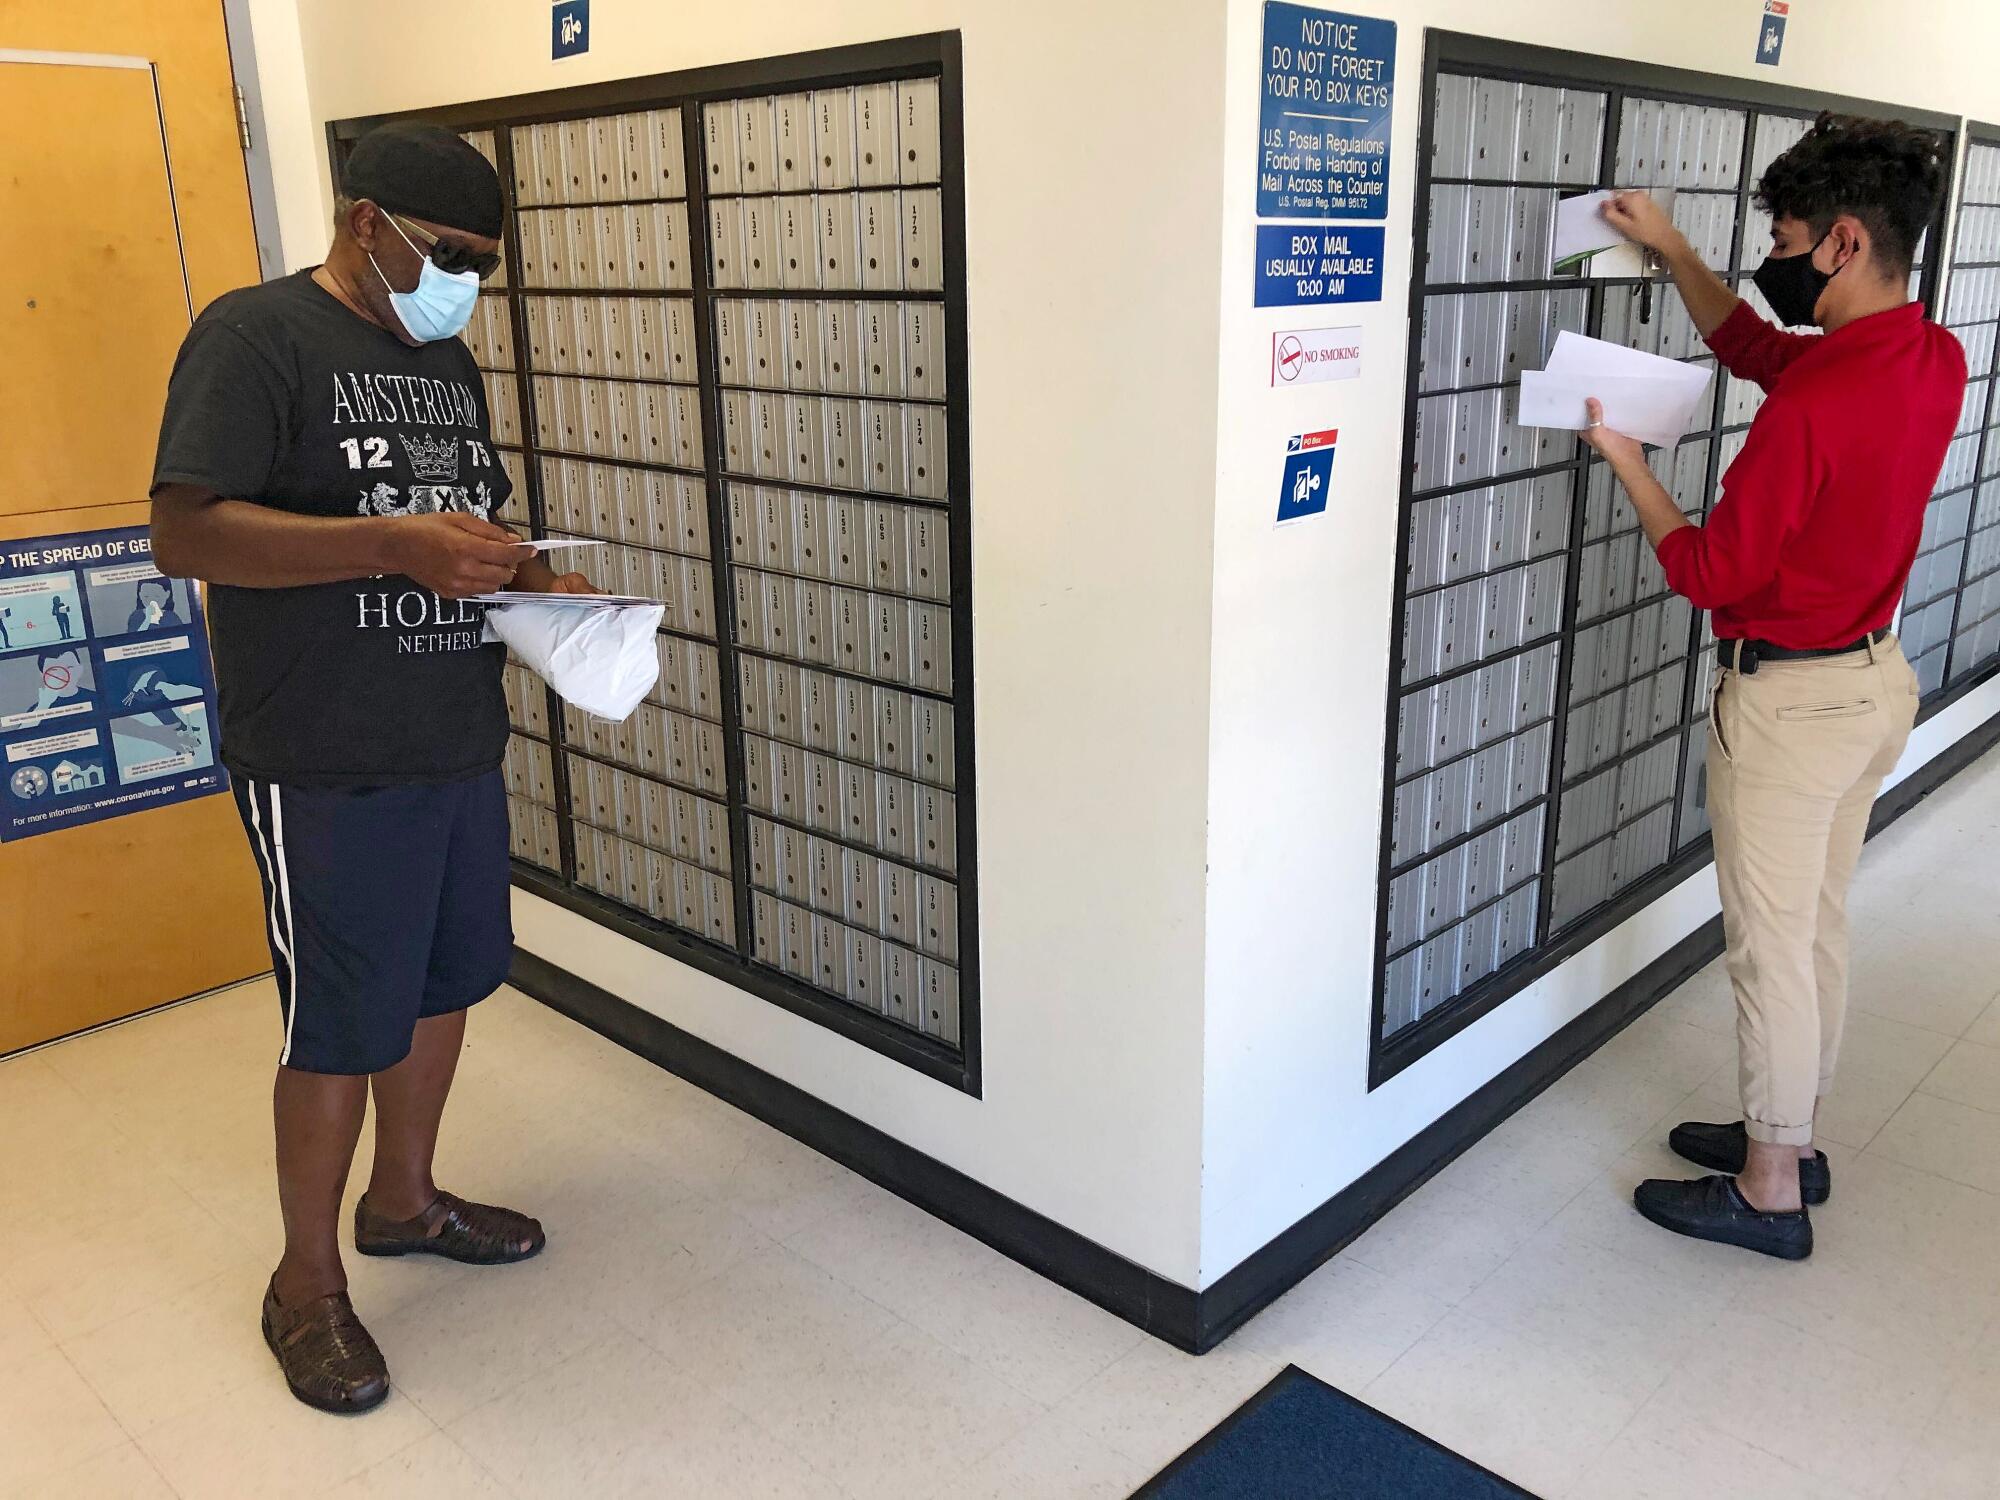 Two people check their mail in a room full of metal mailboxes on two walls.